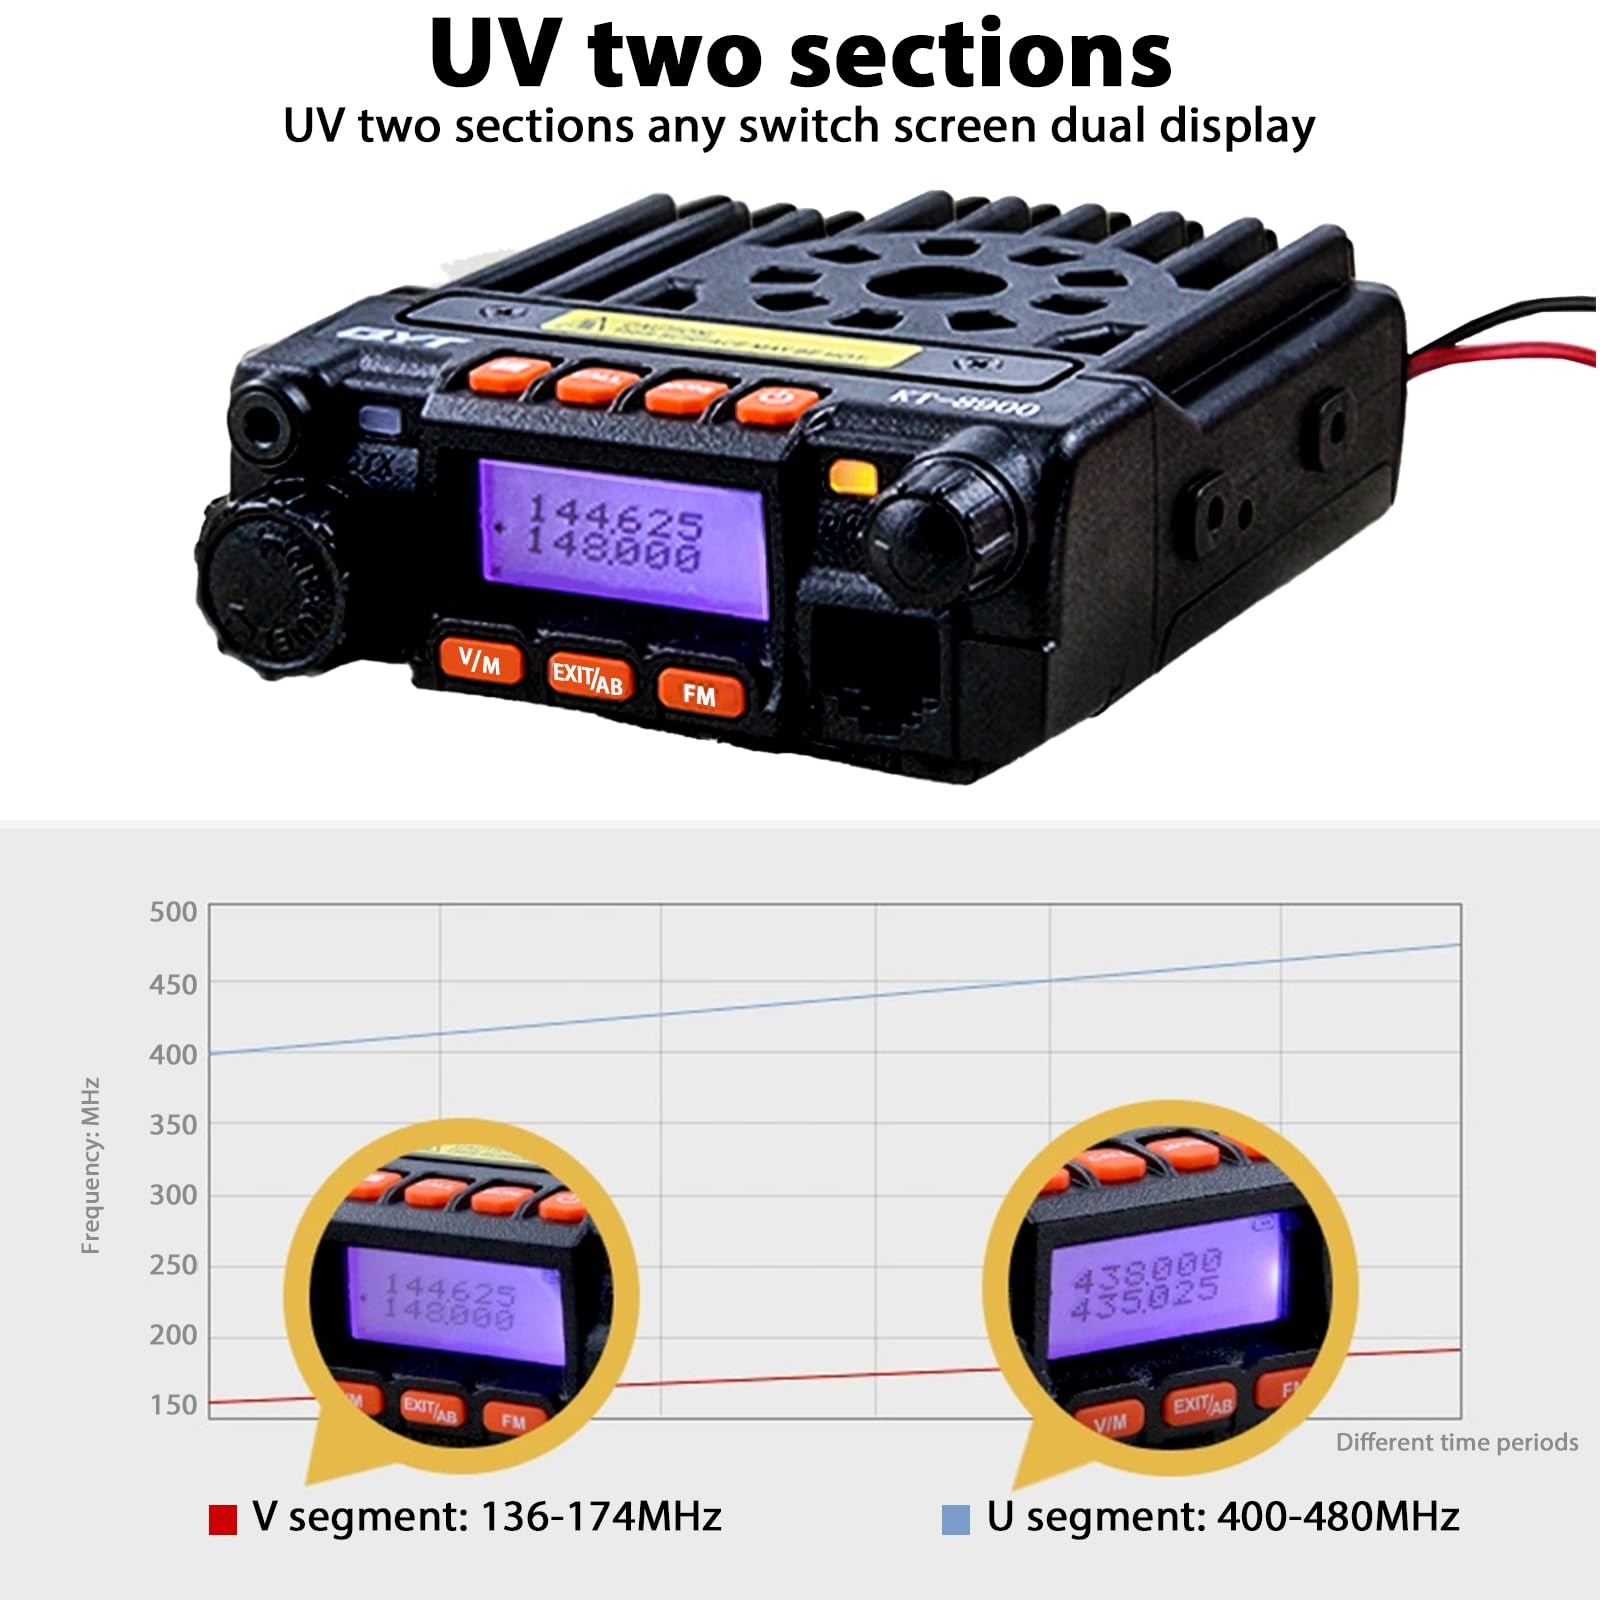 UV Dual Band Car Radio with Carplay, 136-174/400-480MHz 13.8V Experience high quality, long range communication and superior band performance. With advanced dual-band technology and 20 watts of power, you can easily tune to two different frequencies and transmit simultaneously. Enjoy clear, reliable communications in any situation, from your daily commute to your next road trip.